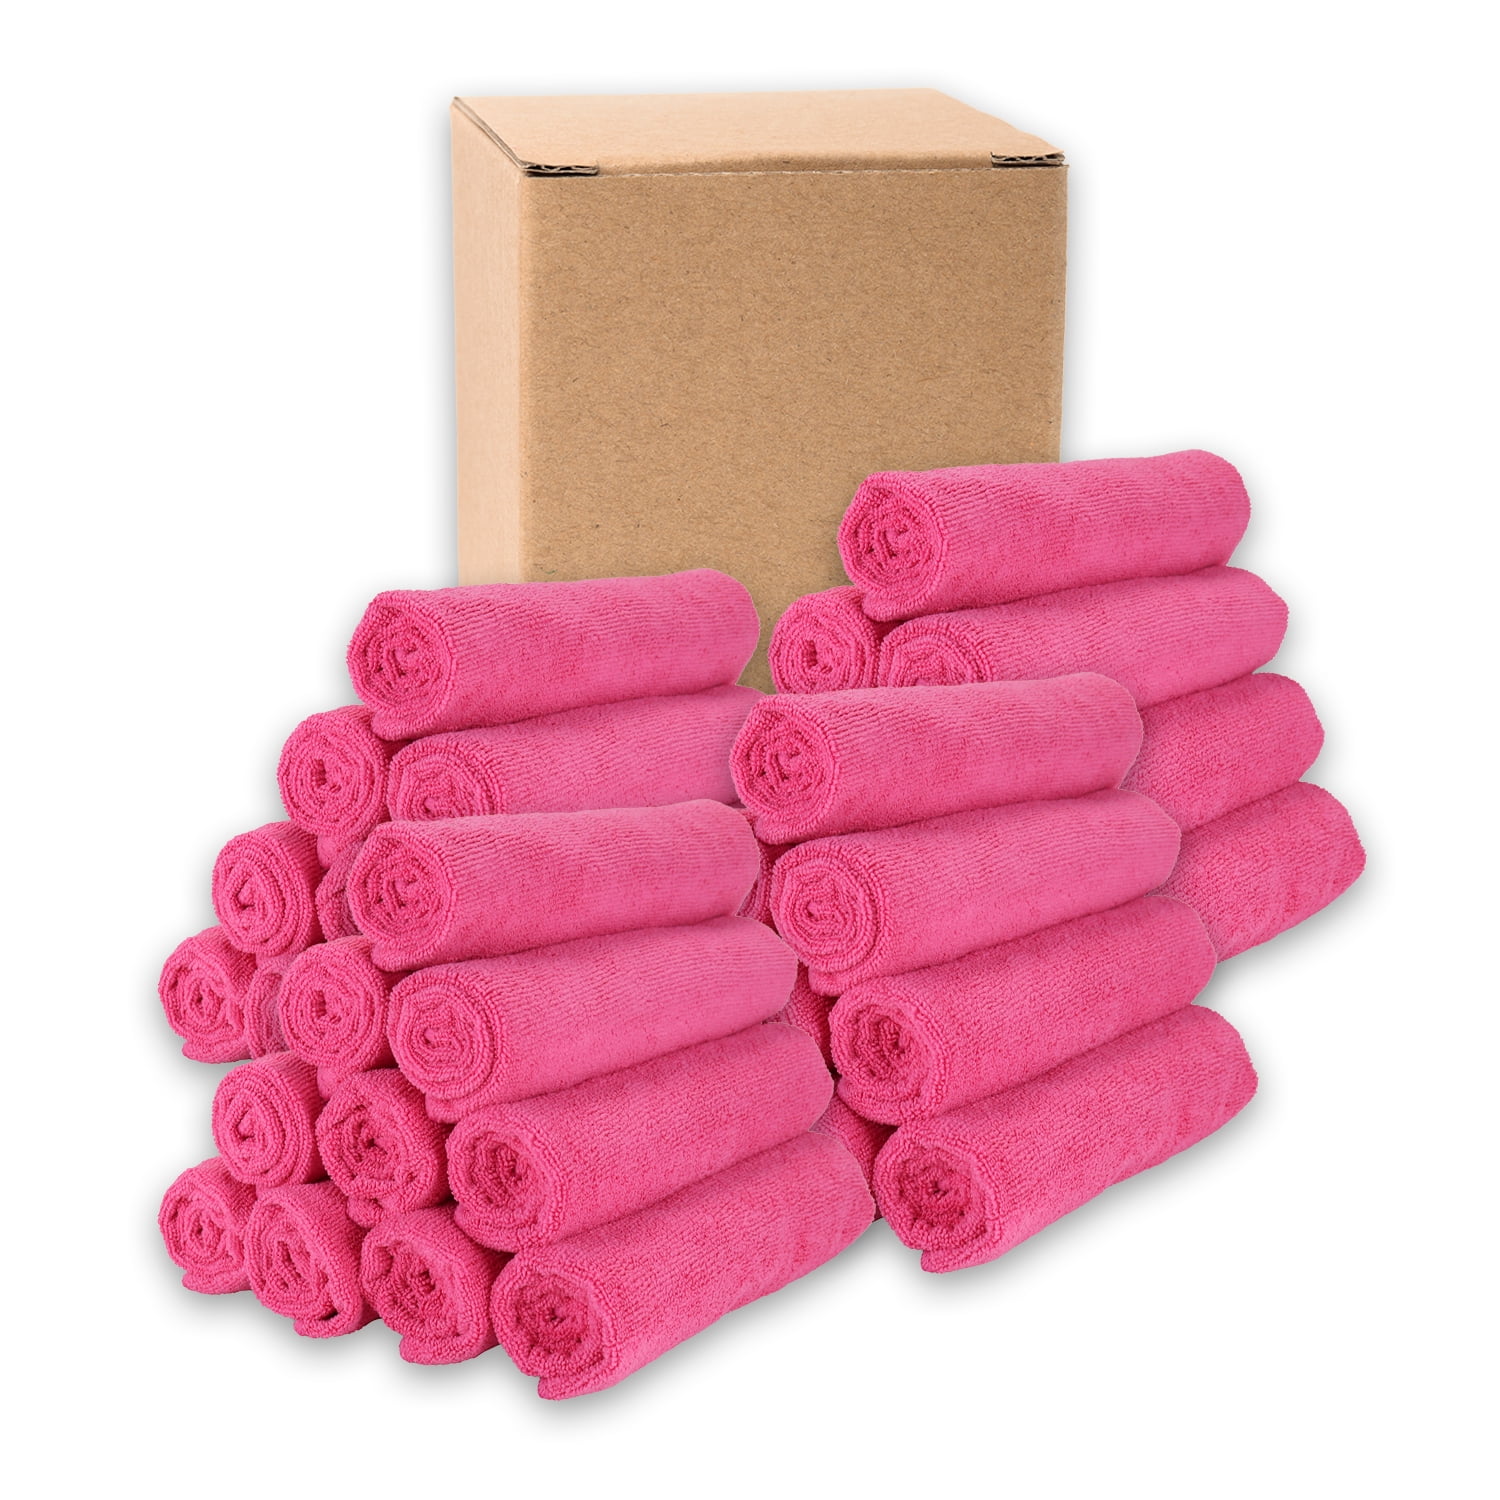 Arkwright Microfiber Gym Towels - Soft Quick Dry Hand Towel - 16 x 27 in. - (12 Pack) Pink